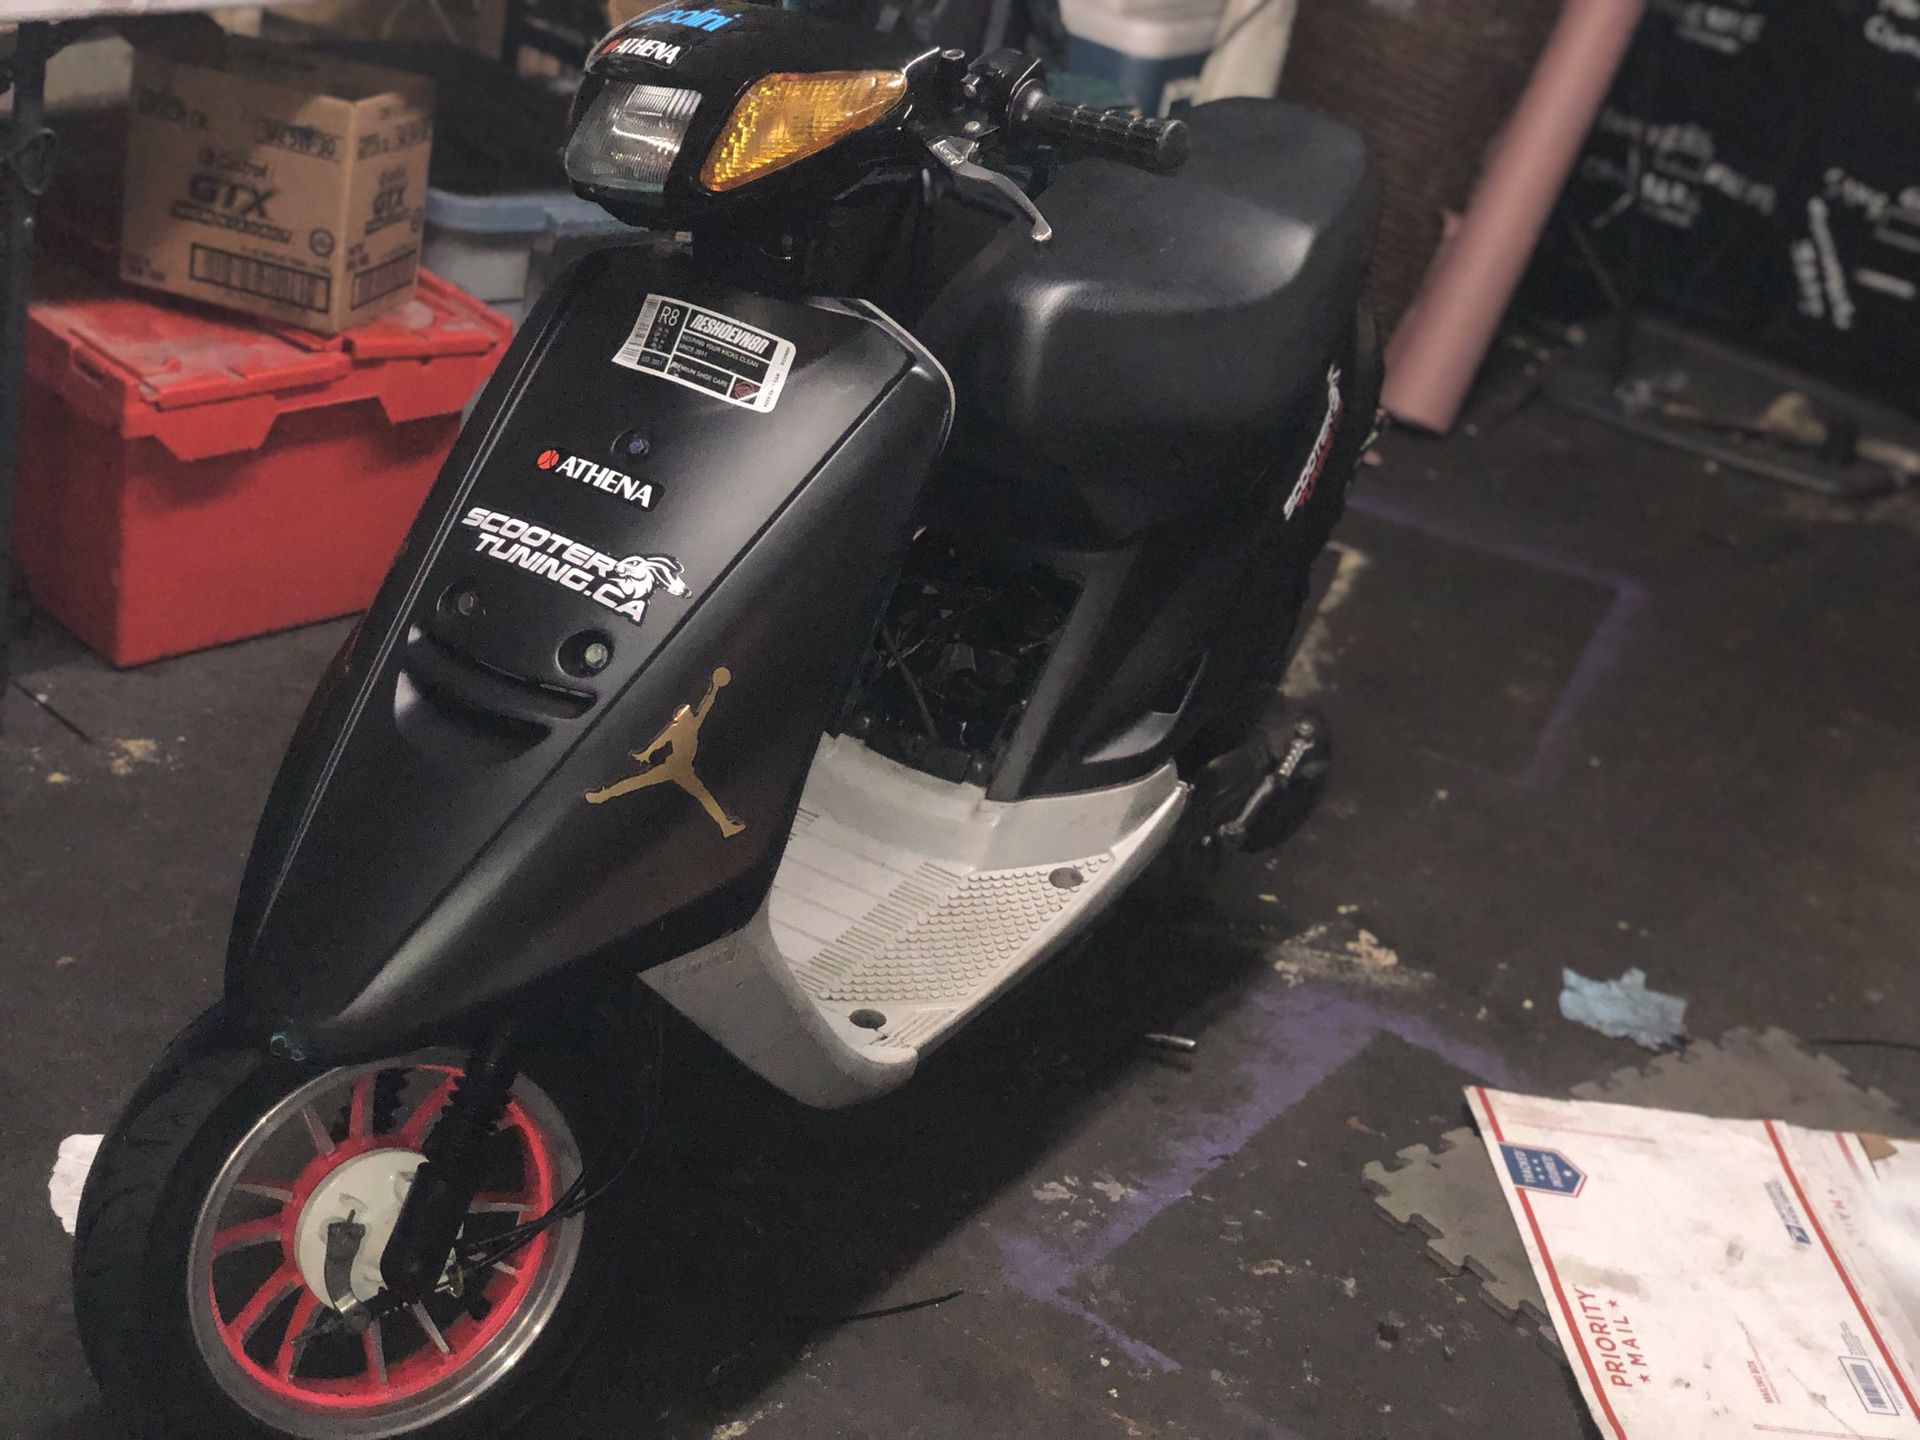 His and Hers – Pair of Yamaha Jog Scooters